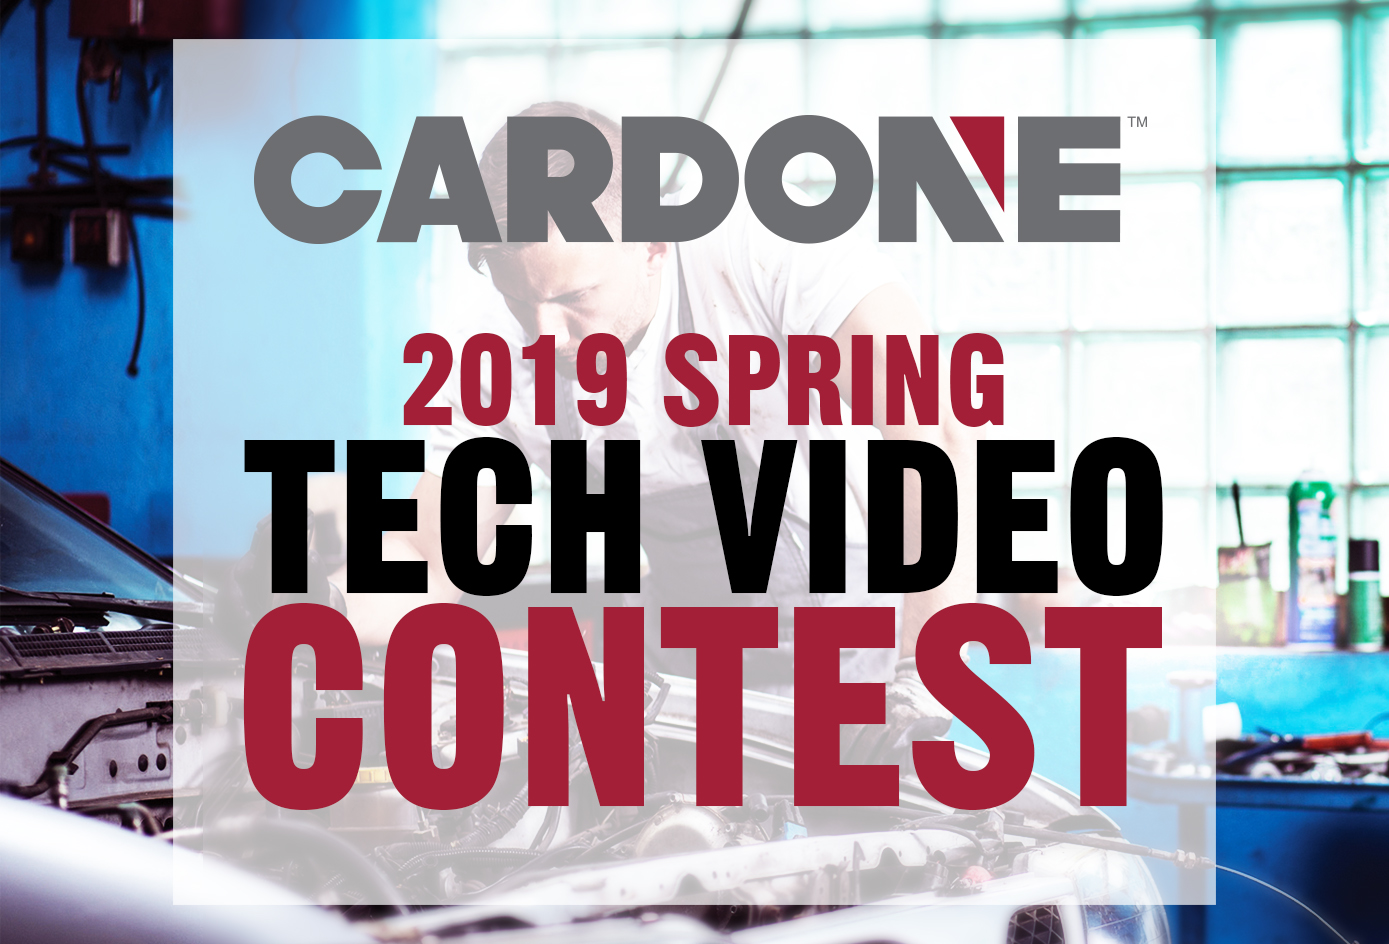 CARDONE Auto Technicians Challenged to Share Installation Videos for Chance to Win $5,000